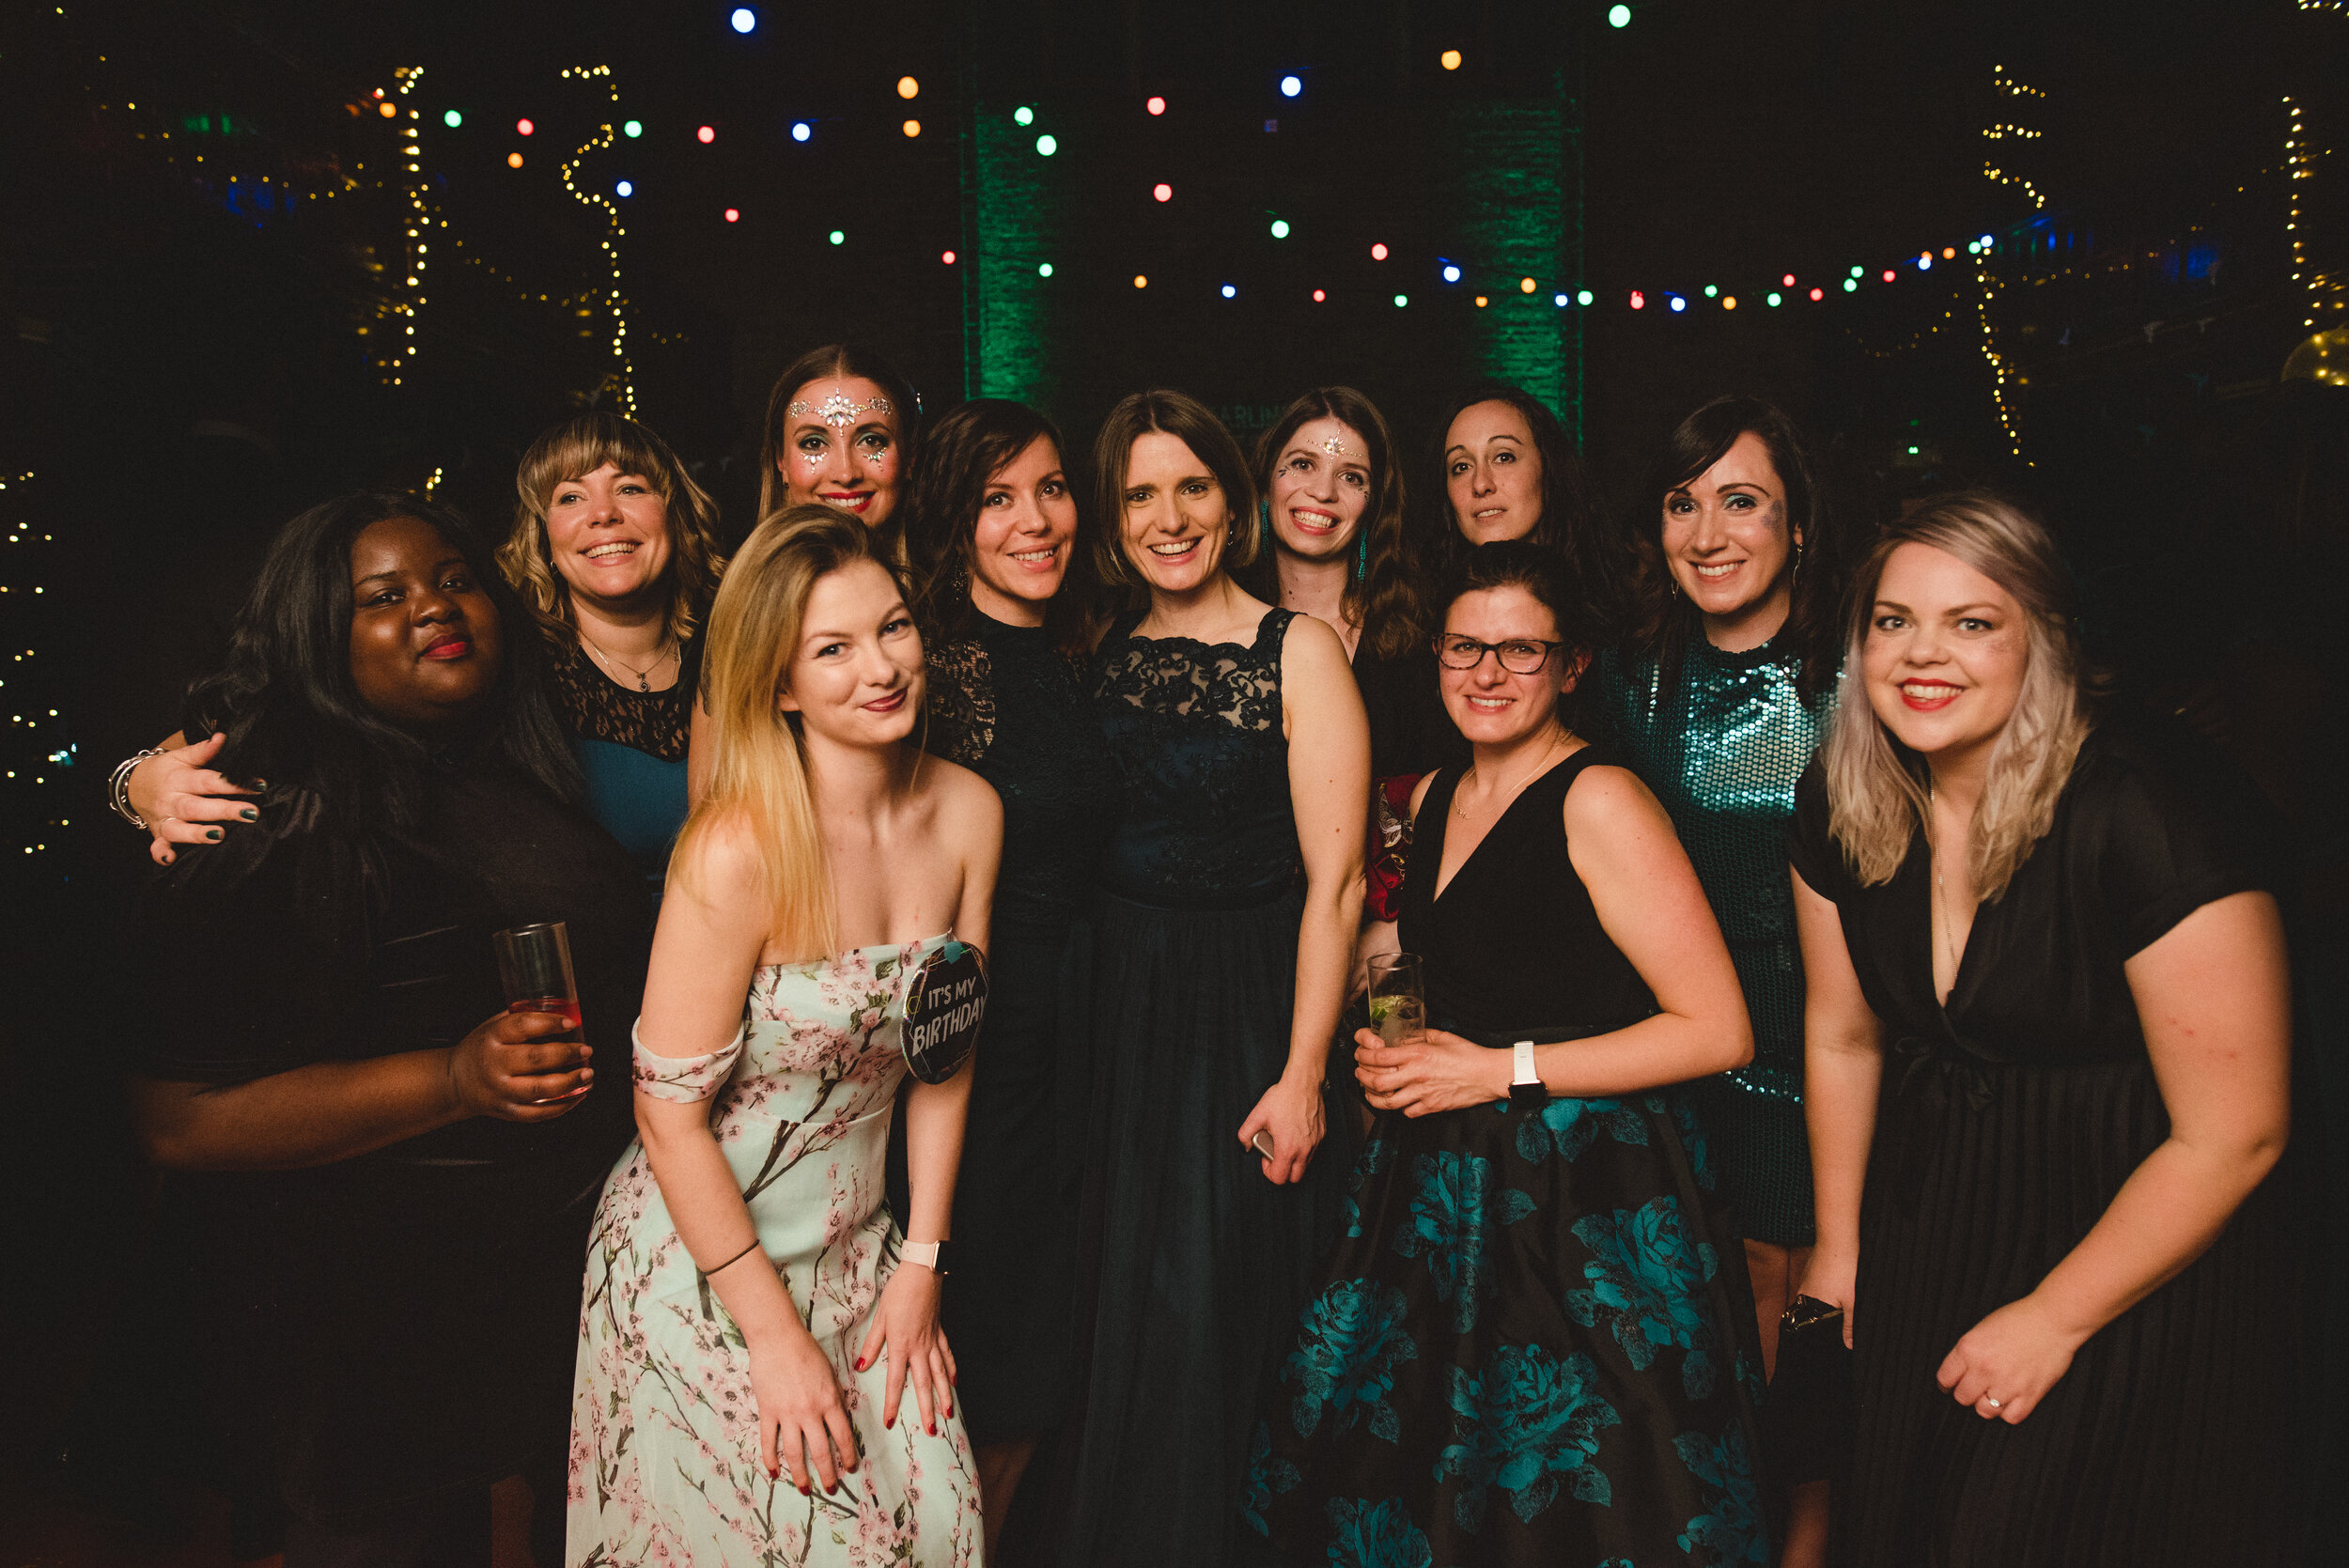 Committee members of the Starling Arts Black and Teal Ball, London 2019. Photo by Alice the Camera 